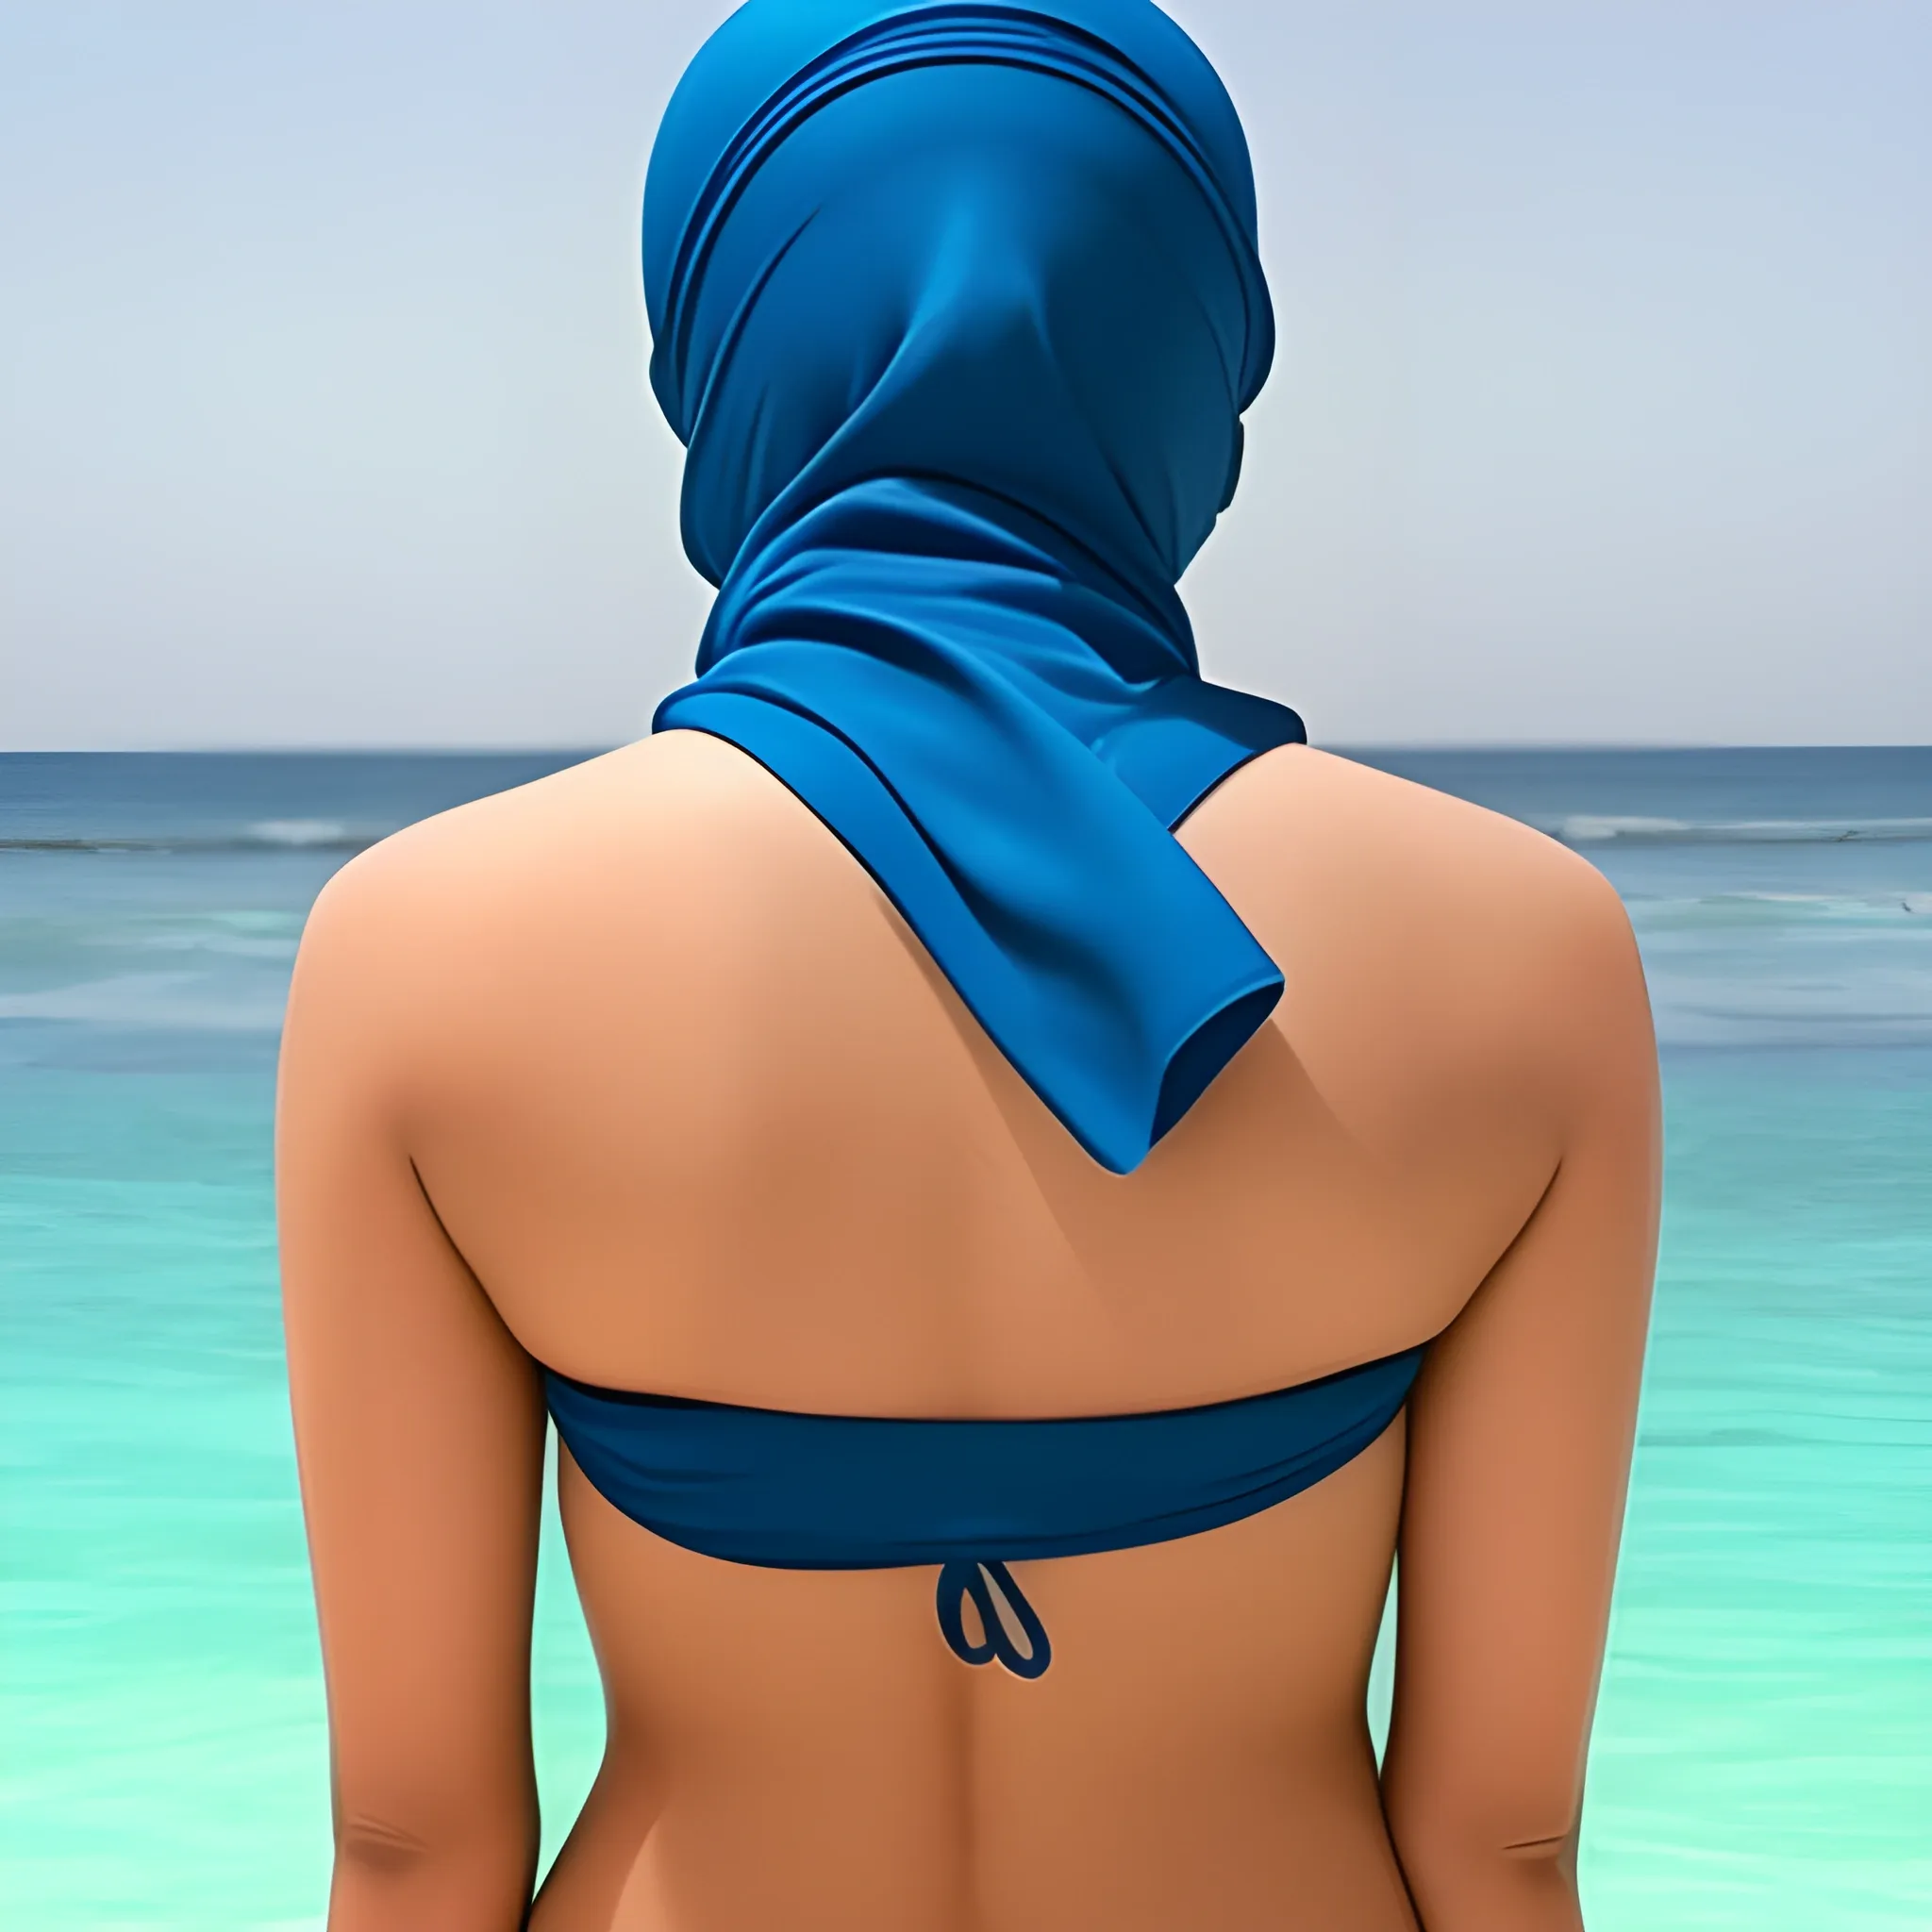 sexy hijab babe in bikini showing back bent showing face